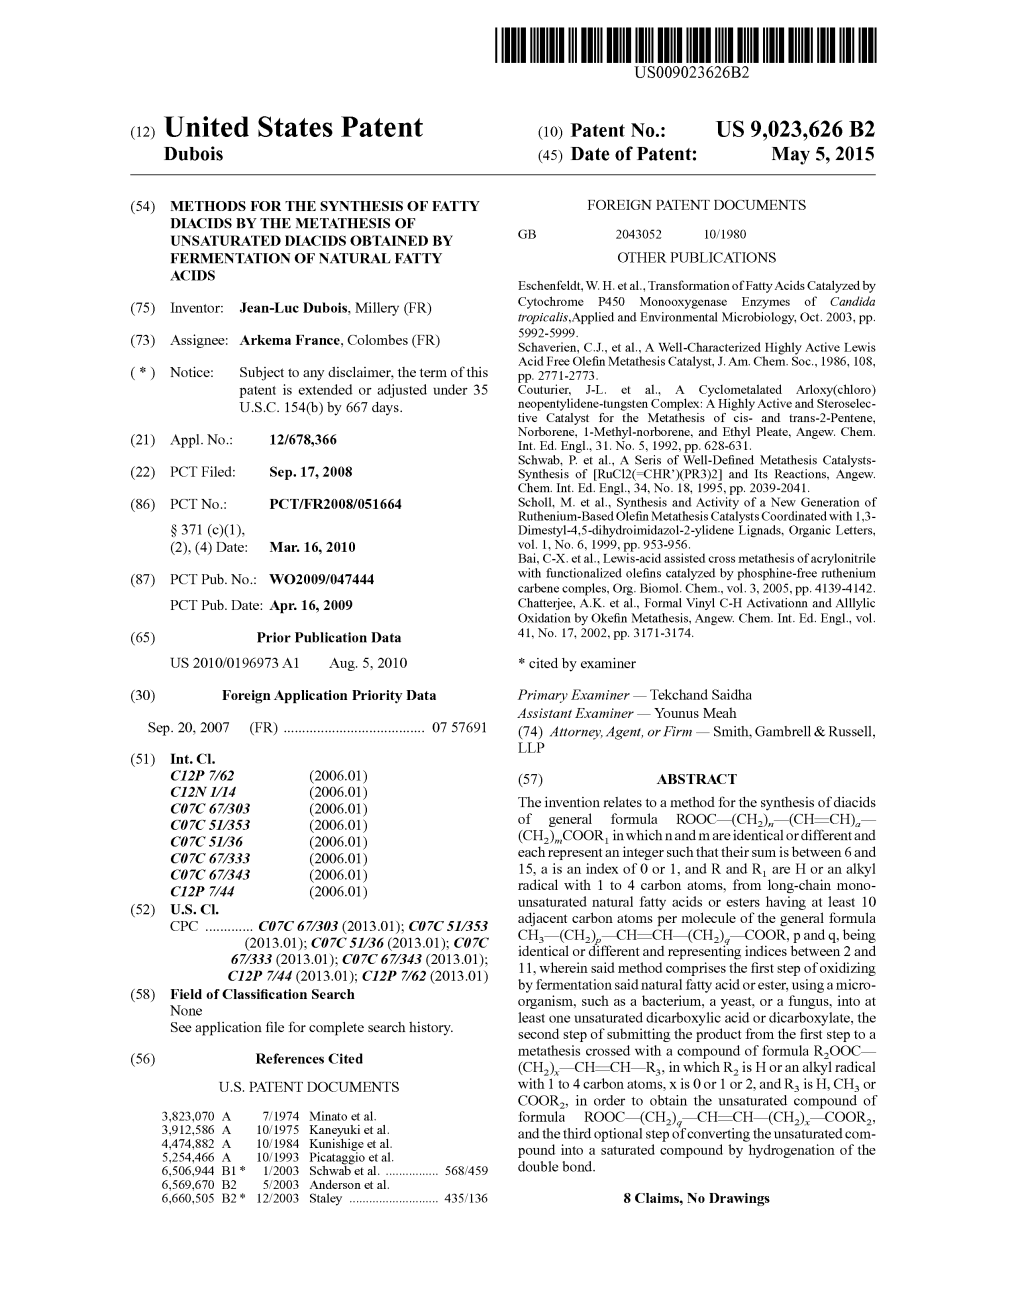 (12) United States Patent (10) Patent No.: US 9,023,626 B2 Dubois (45) Date of Patent: May 5, 2015